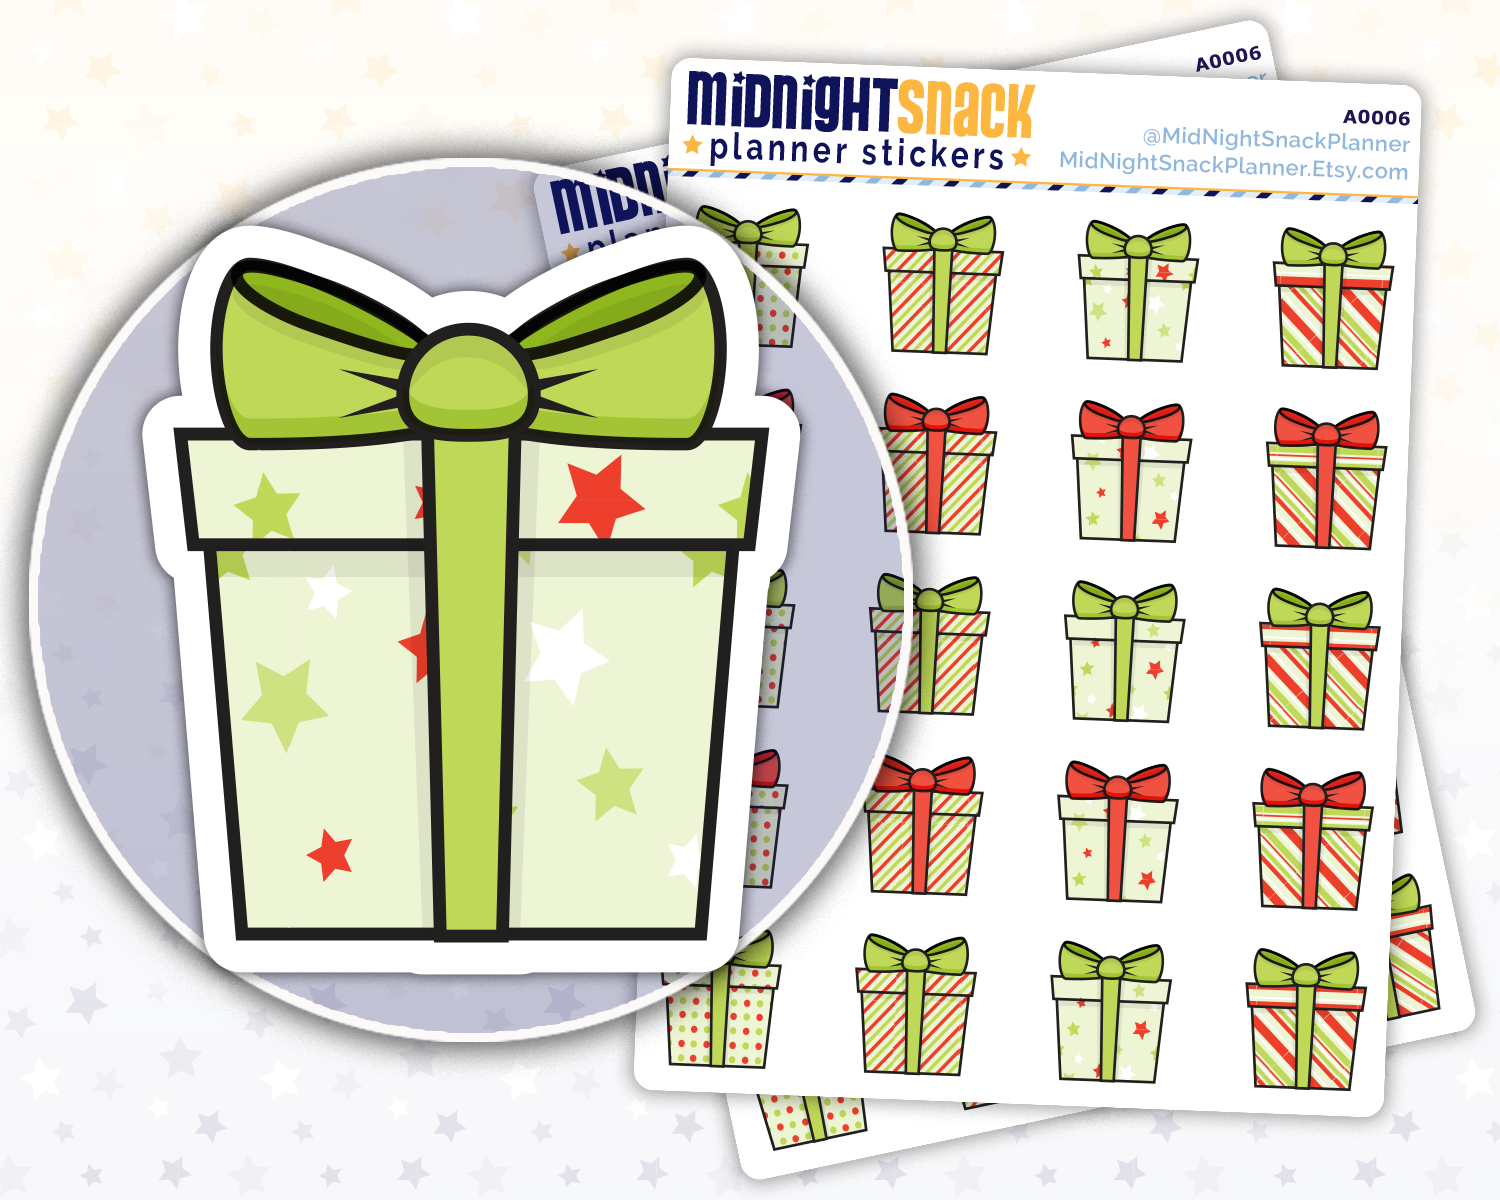 Small Christmas Presents Icon: Holiday Planner Stickers Midnight Snack Planner